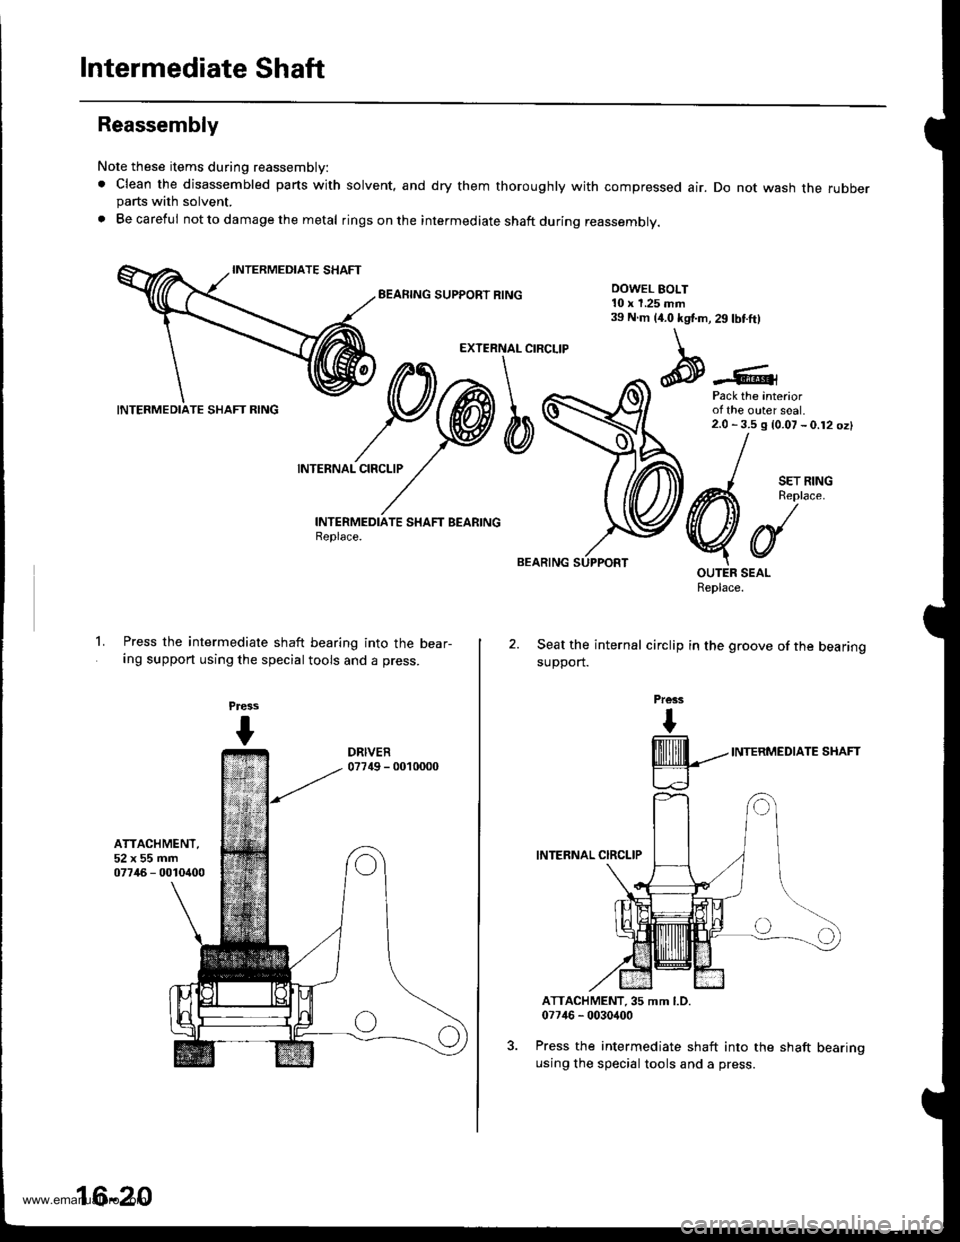 HONDA CR-V 2000 RD1-RD3 / 1.G Workshop Manual 
Intermediate Shaft
Reassembly
Note these items during reassembly:
. Clean the disassembled parts withparts with solvent.
. Be careful not to damage the metal
solvent, and dry them thoroughly with com